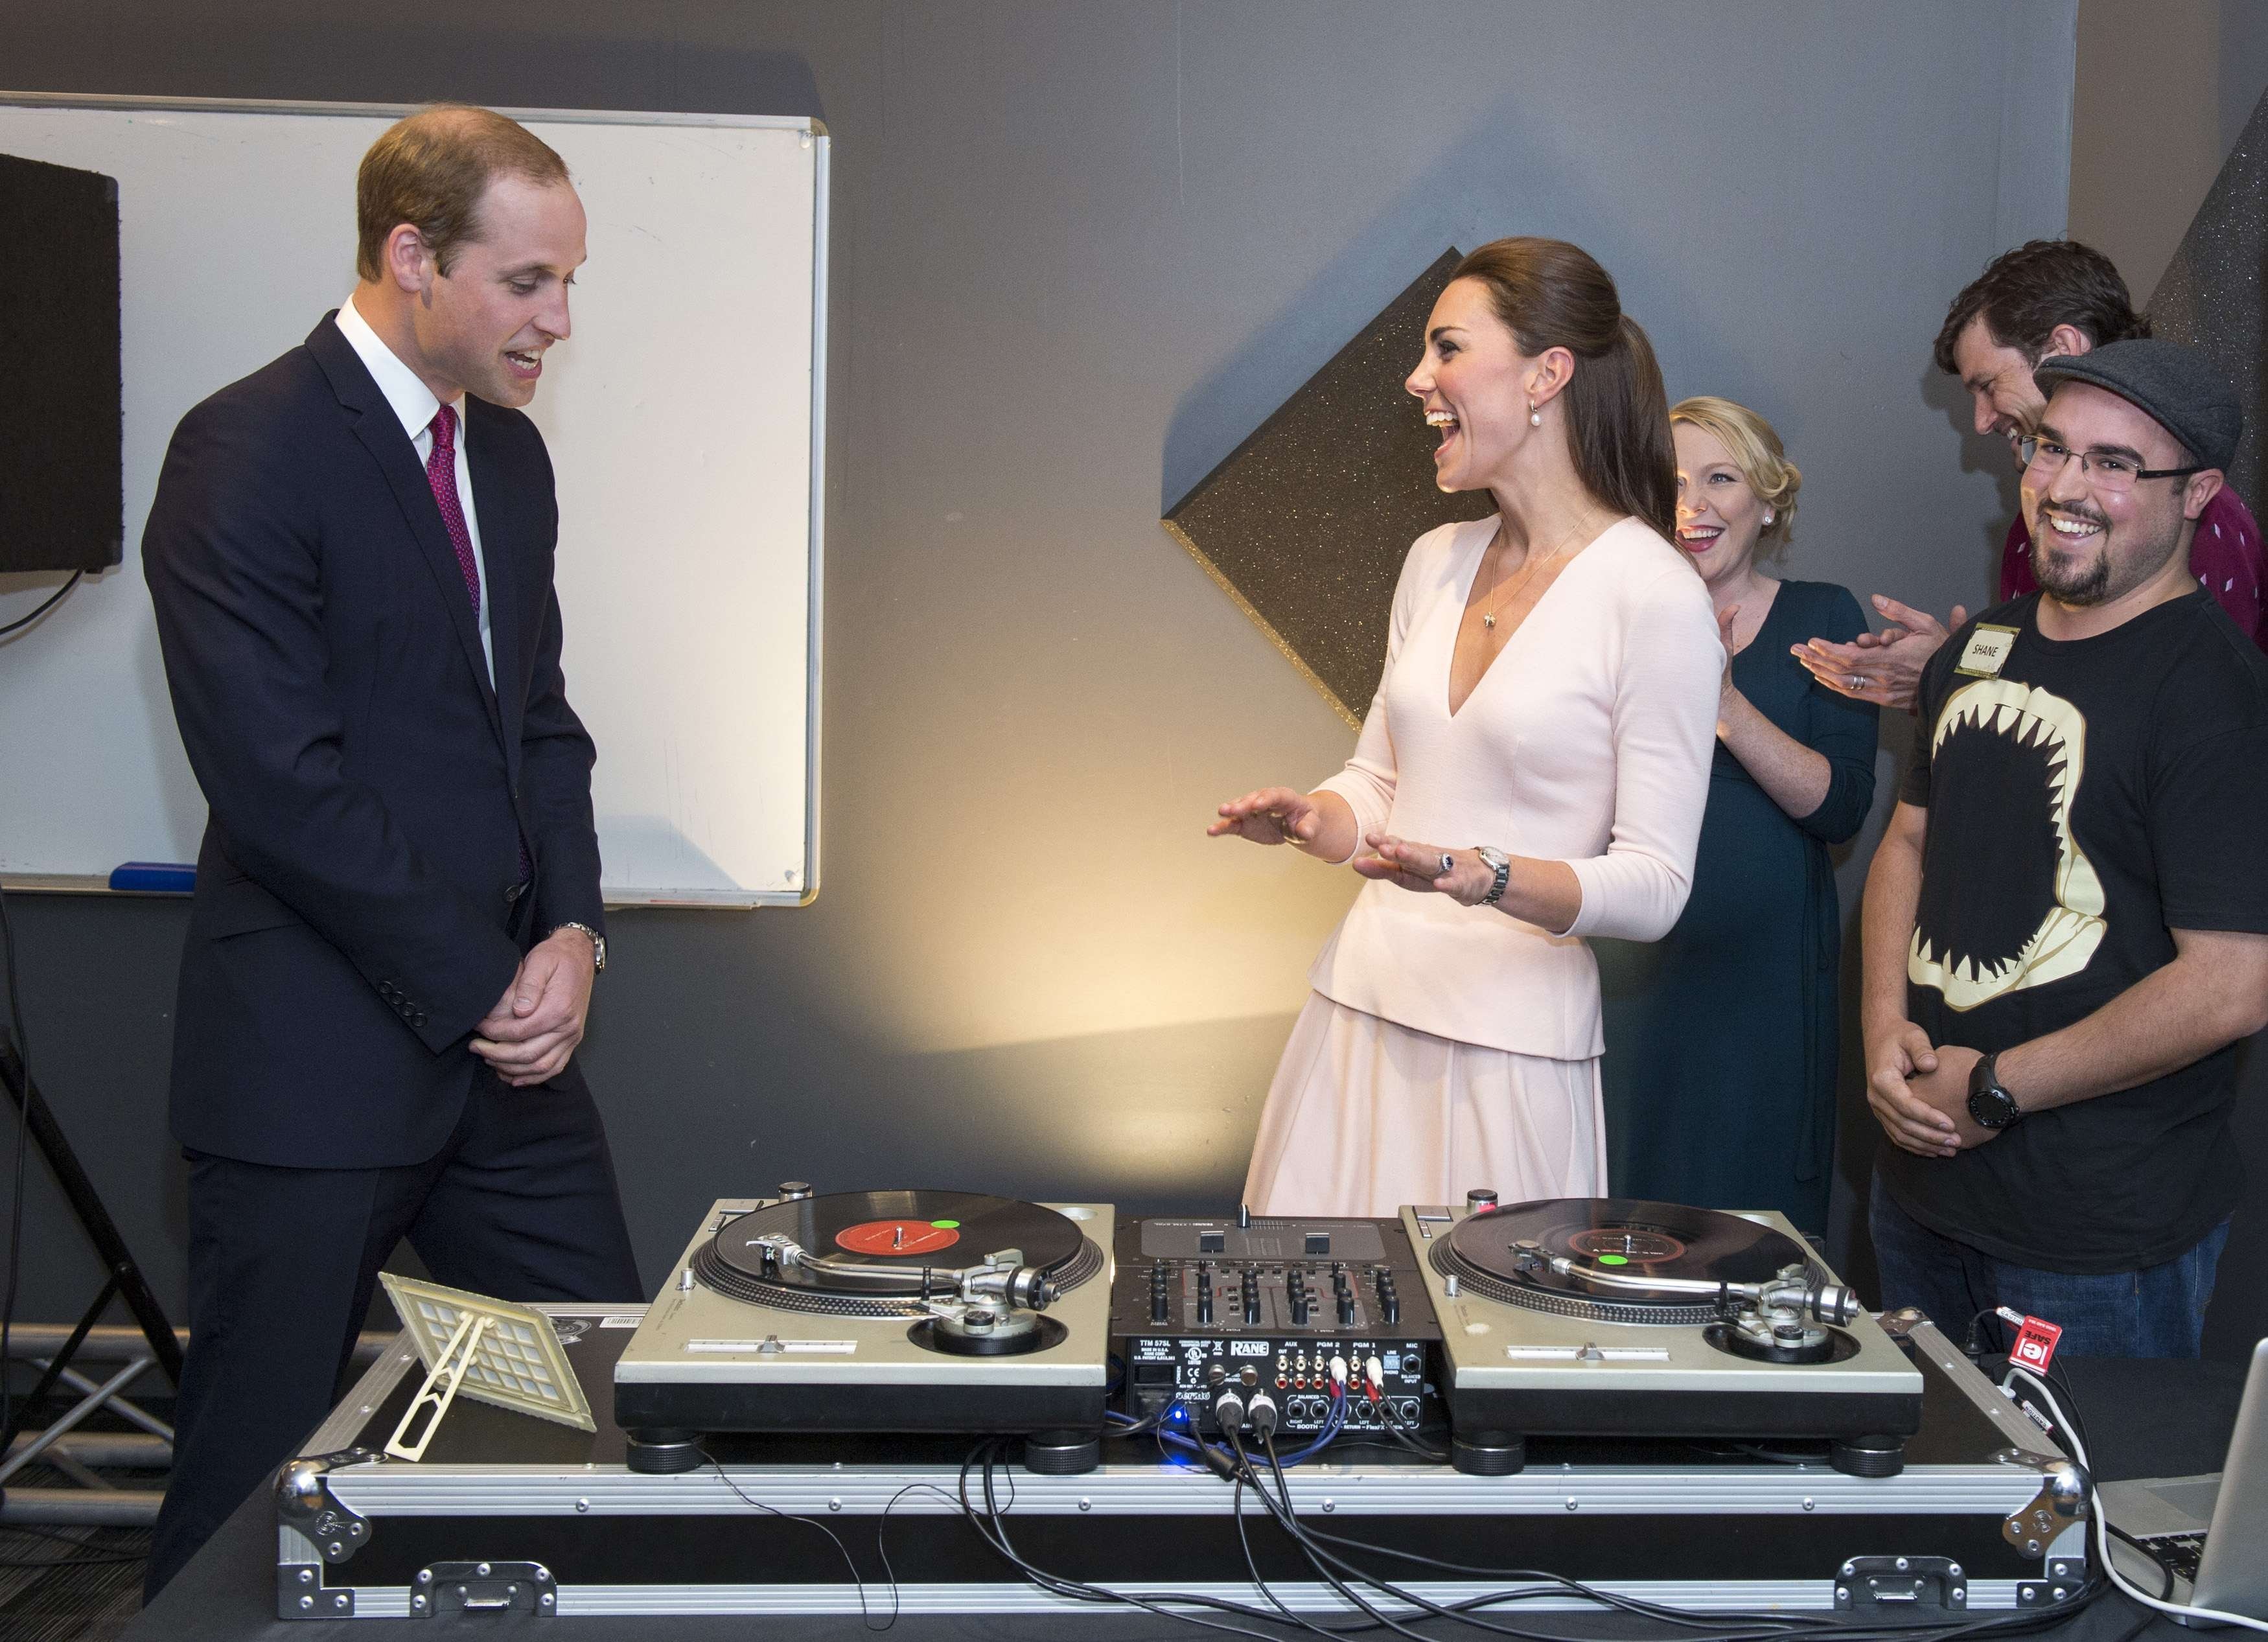 Britain's Catherine, Duchess of Cambridge gestures to her husband Prince William, as they play on DJ decks at the Northern Sound System in Elizabeth near Adelaide, Australia,  April 23, 2014. (Arthur Edwards—Reuters)